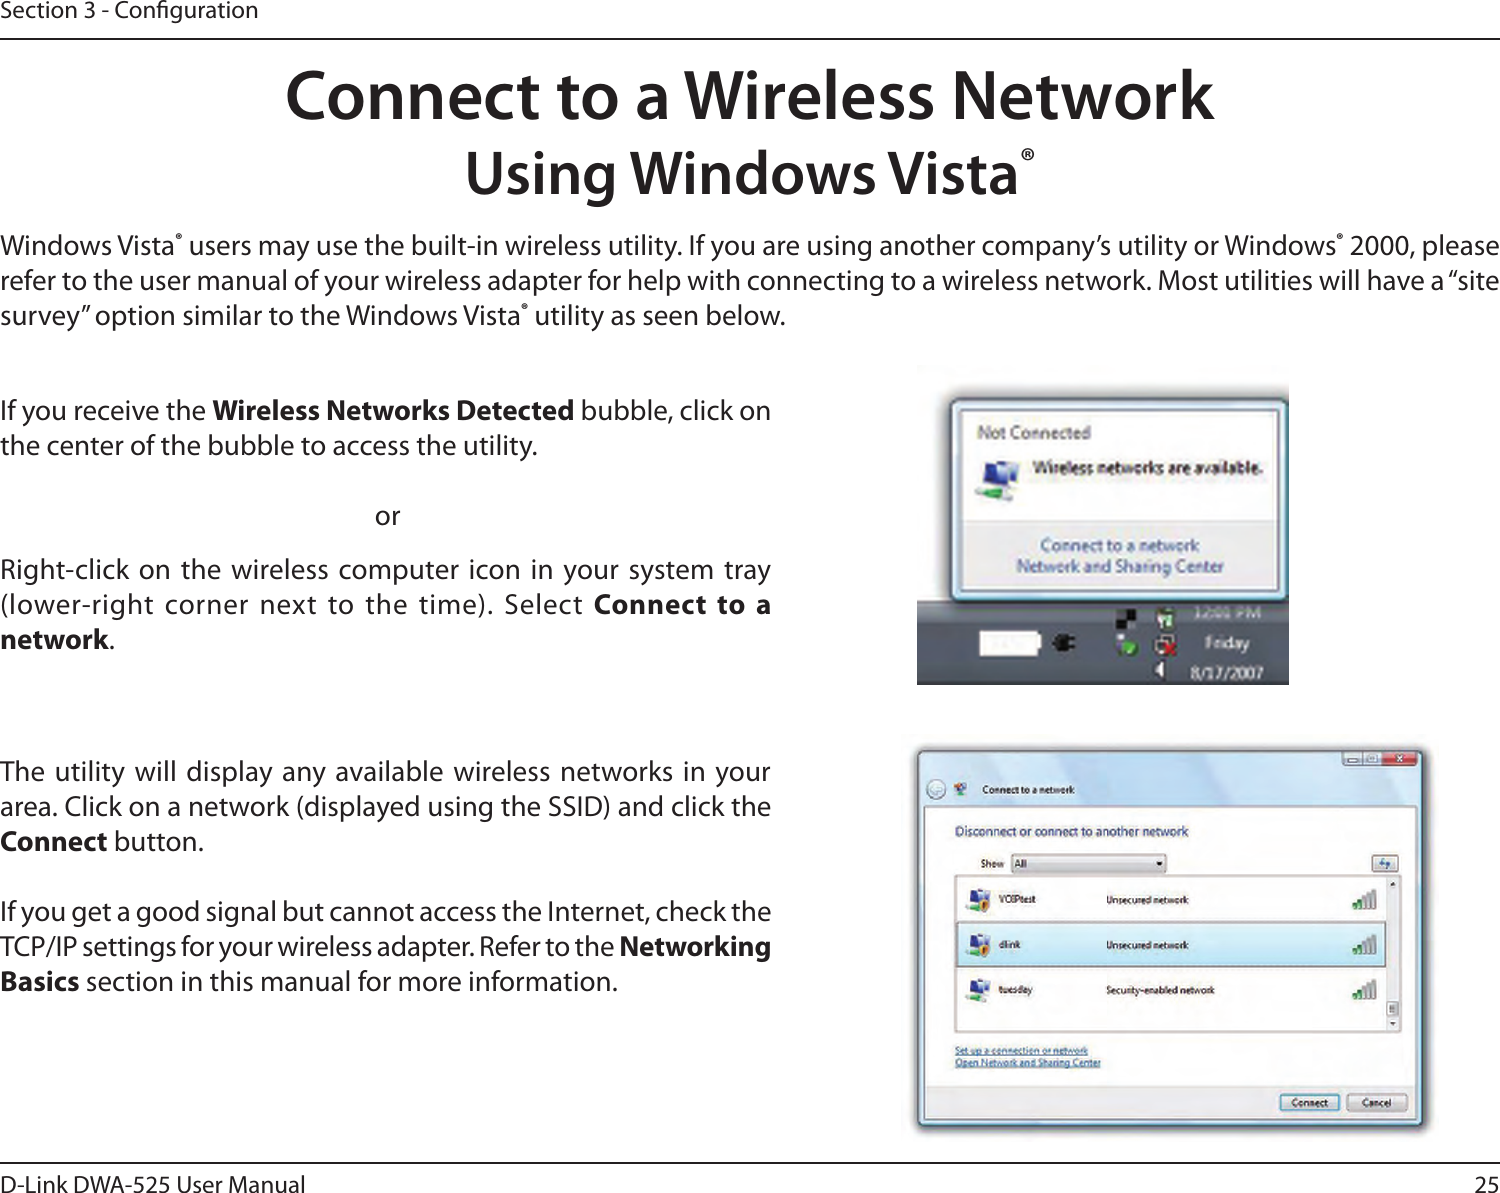 25D-Link DWA-525 User ManualSection 3 - CongurationConnect to a Wireless NetworkUsing Windows Vista®Windows Vista®usersmayusethebuilt-inwirelessutility.Ifyouareusinganothercompany’sutilityorWindows®2000,pleaserefer to the user manual of your wireless adapter for help with connecting to a wireless network. Most utilities will have a “site survey” option similar to the Windows Vista® utility as seen below.Right-click on the wireless computer  icon in your  system tray (lower-right corner next to the time). Select Connect  to  a network.If you receive the Wireless Networks Detectedbubble,clickonthe center of the bubble to access the utility.     orThe utility will display any available wireless networks in  your area.Clickonanetwork(displayedusingtheSSID)andclicktheConnect button.IfyougetagoodsignalbutcannotaccesstheInternet,checktheTCP/IP settings for your wireless adapter. Refer to the Networking Basics section in this manual for more information.